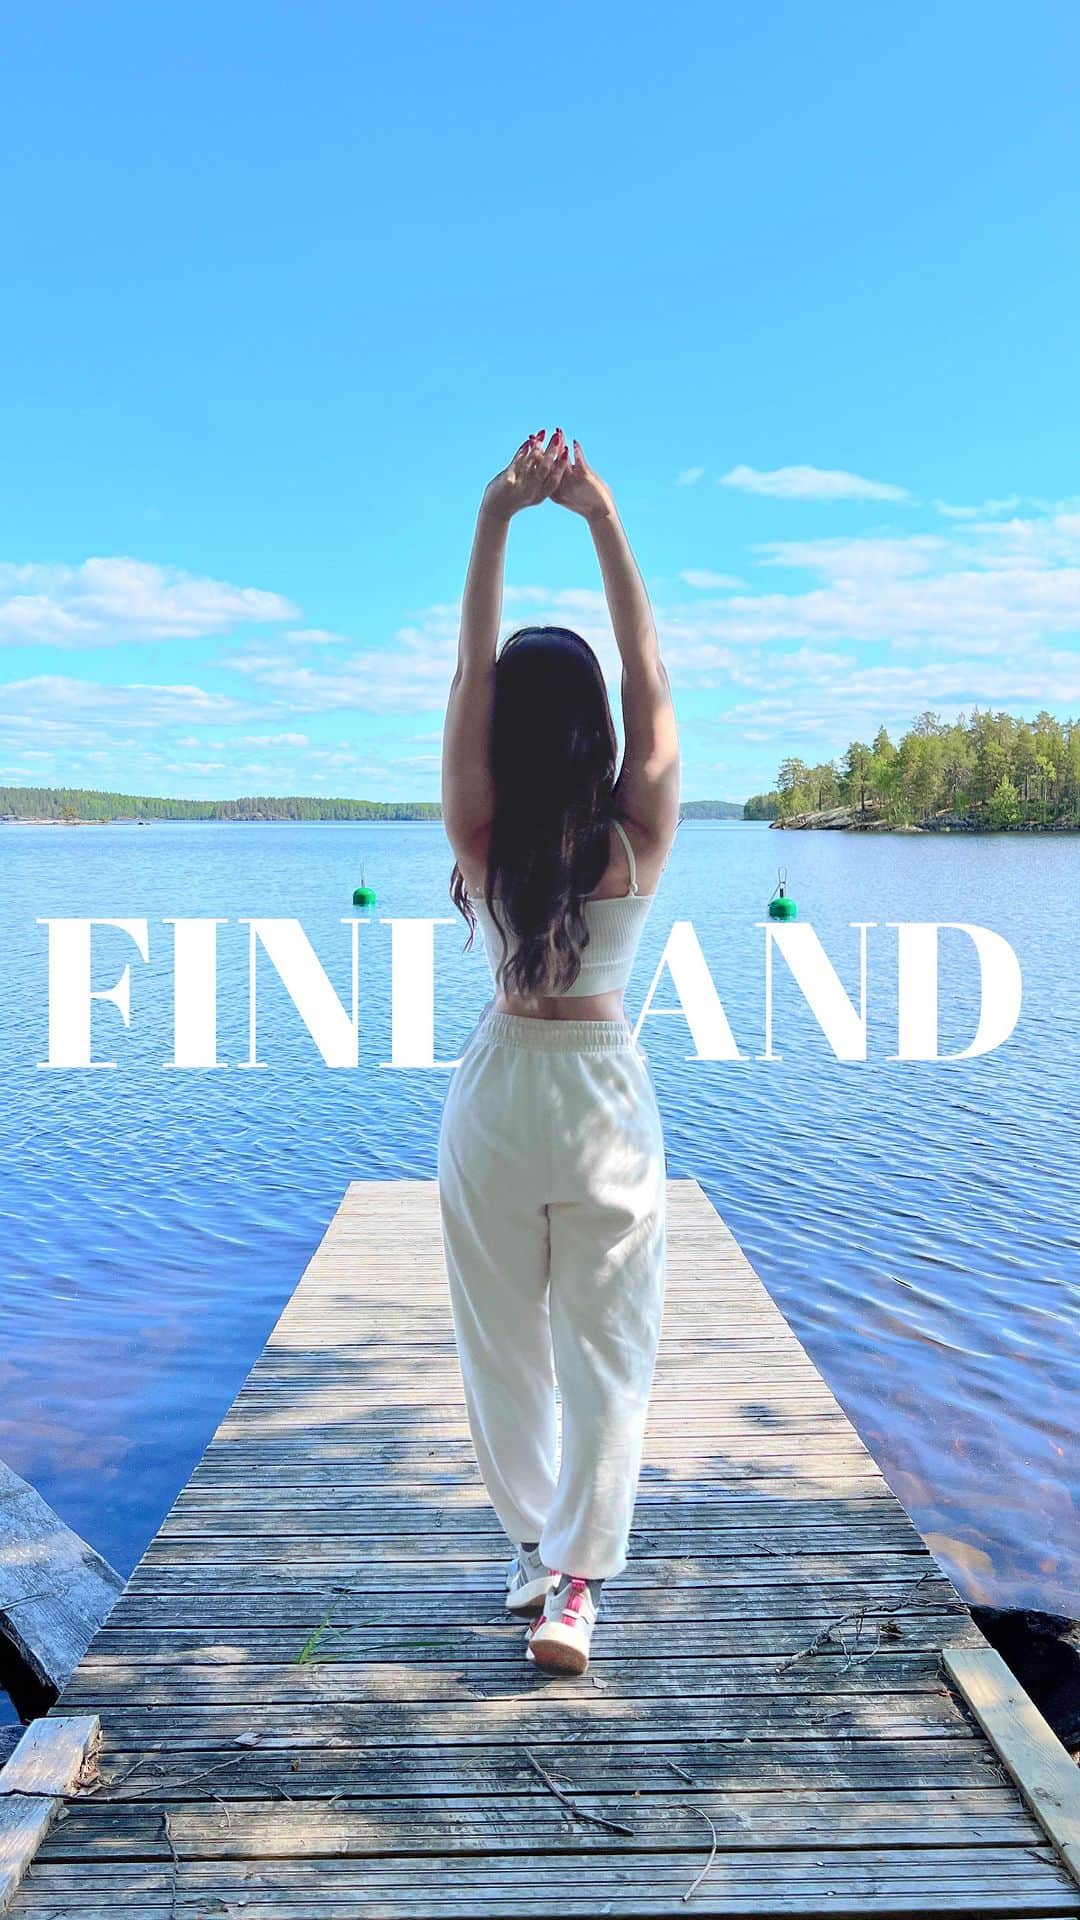 Chiakiのインスタグラム：「Here is my 4 day trip to Finland. 🇫🇮  I have never explored the country before, but now I’m in love with it. 💕 I adore the sauna culture and the outstanding nature (75% of Finland is covered by forest and 10% by lakes and rivers). I discovered that feeling the nature close to you, eating healthy, and enjoying outdoor activities instead of staying on your phone are some of the keys to being happy. ☀️ We will definitely go back!  フィンランド4日間の旅🇫🇮 世界で一番幸せ✨と言われている国は、75％が緑🌳10%が湖や川🏞️で囲まれていて、空気も水も新鮮で気持ちが浄化される感覚でした💕 人も優しく、ご飯も美味しくて（主に海鮮). 🐟 私が一番気に入ったのはサウナの文化です！300万個のサウナがあるんだって！（って事は、2人に1つサウナが家にある） 「寒い日が多いからサウナが好きなの？」って聞いたら、「サウナはストレス解消にからだの筋肉も癒すからだよ！冬は、サウナに入った後、外の積もった雪❄️にジャンプするんだよ〜！」 身体の癒し方が日本の温泉と似ていて嬉しくなった😆  自然🍃に触れる事は、私たちの身体にも心にもやっぱり一番大切な事なんだな、と感じました❤️  Thank you for guiding us @adelinehelena @ireneruuskanen 💕 I am so glad to have met you. 😆 . . . @ourfinland @visitfinlandjapan @gosaimaa @lovelakesaimaa @kururesort  #visitfinland #FindYourInnerFinn #旅行 #フィンランド #travelblogger #traveler #最高な旅 #travelyoutuber」